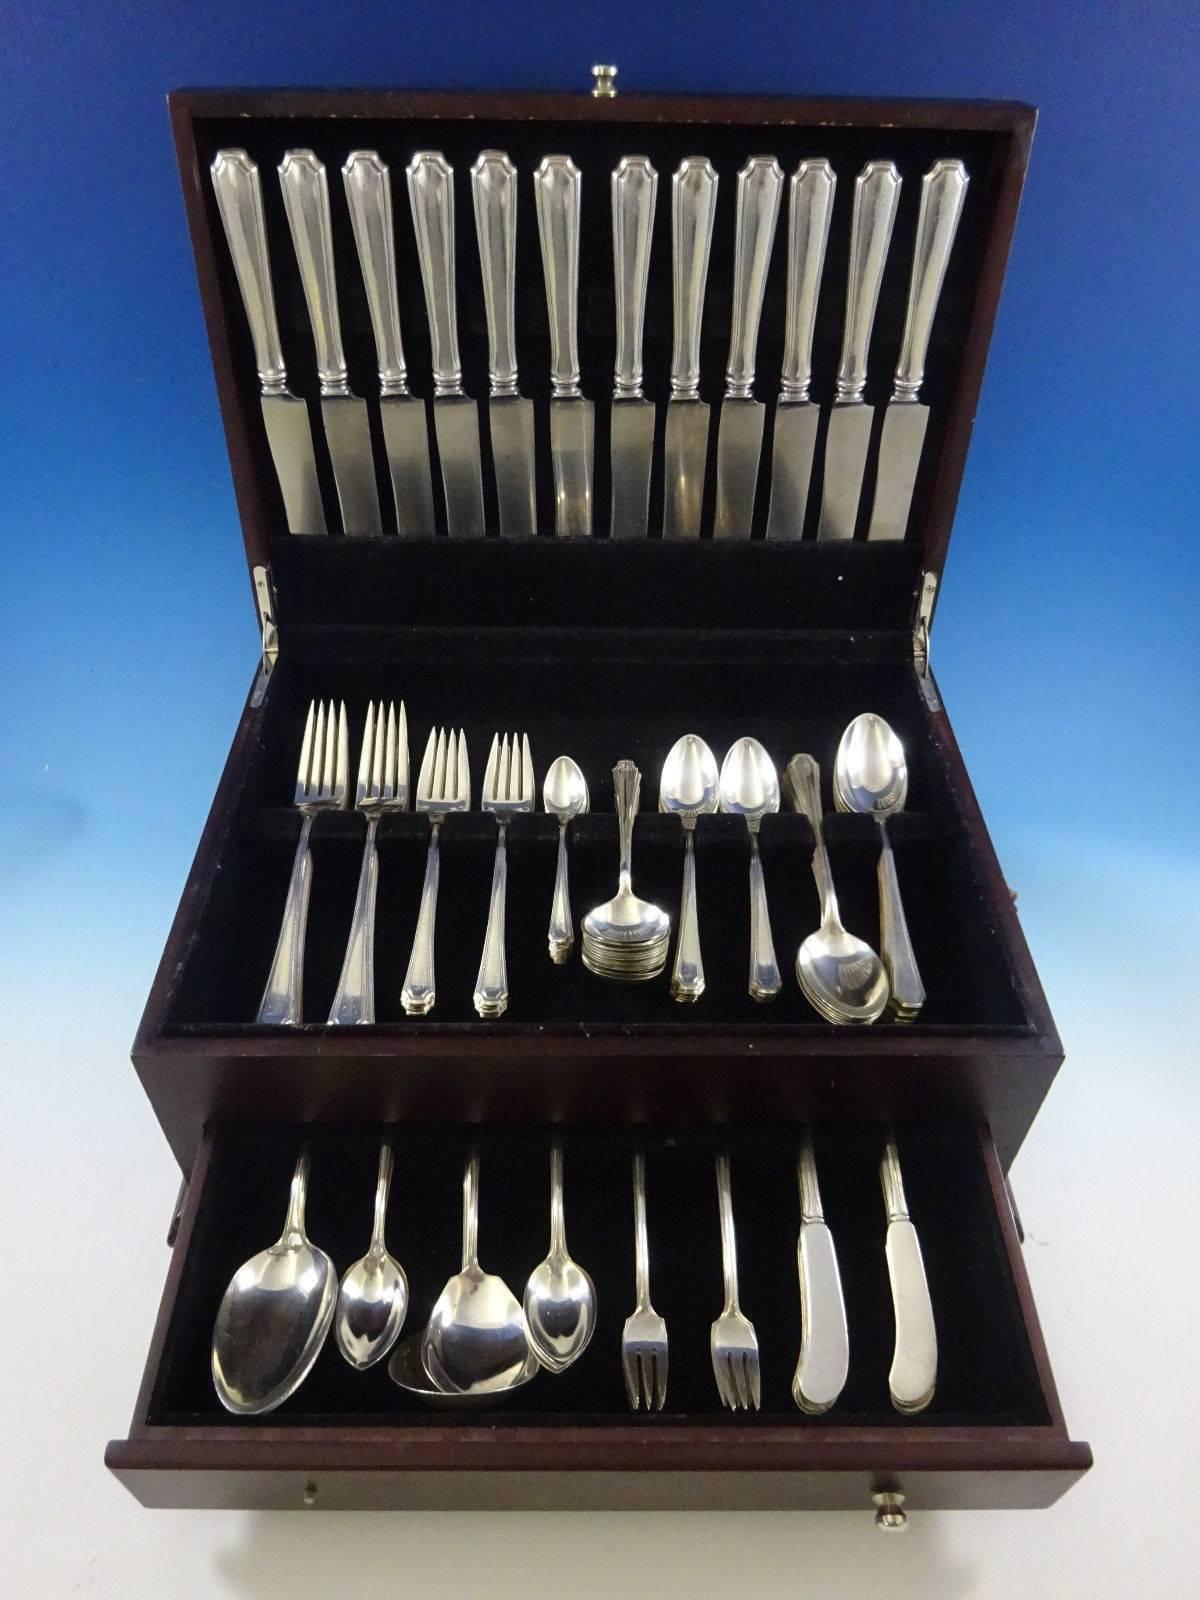 Huge Lady Constance by Towle sterling silver dinner size flatware set of 126 pieces. This set includes:

12 dinner size knives, 9 5/8